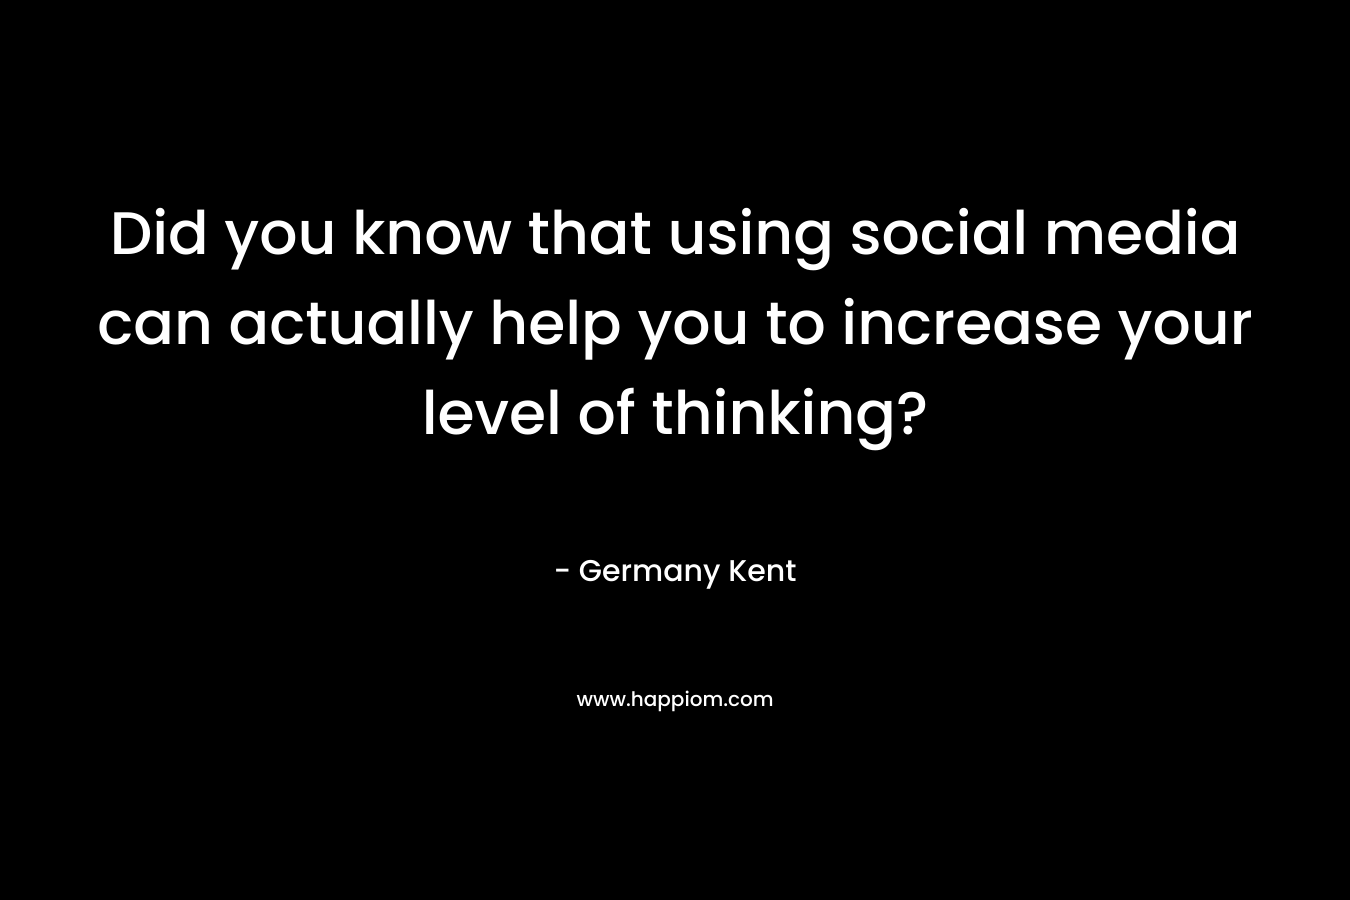 Did you know that using social media can actually help you to increase your level of thinking? – Germany Kent